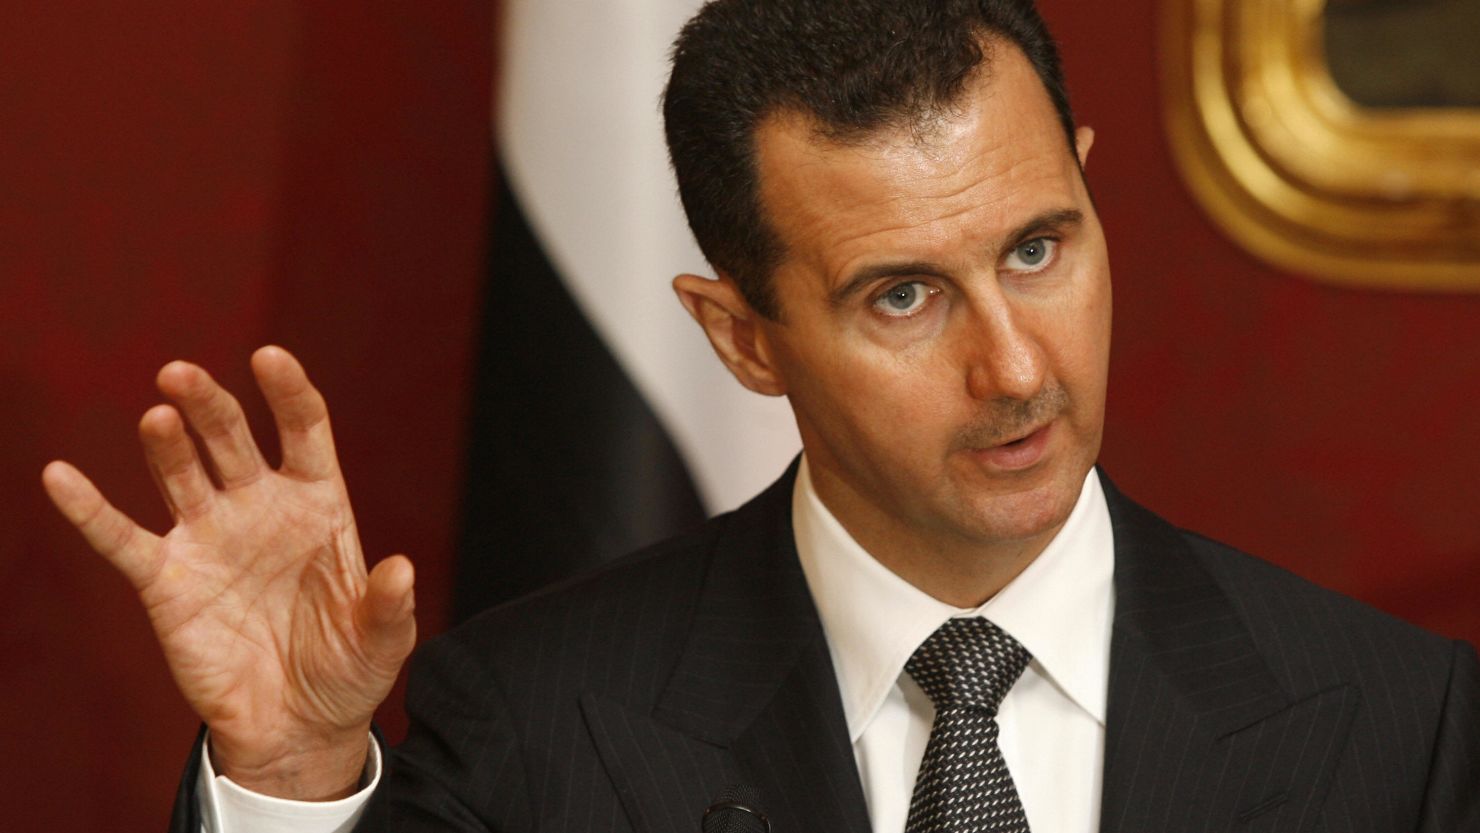 Bashar al-Assad vowed to lead Syria "towards a future that fulfills the hopes and legitimate ambitions of our people." 